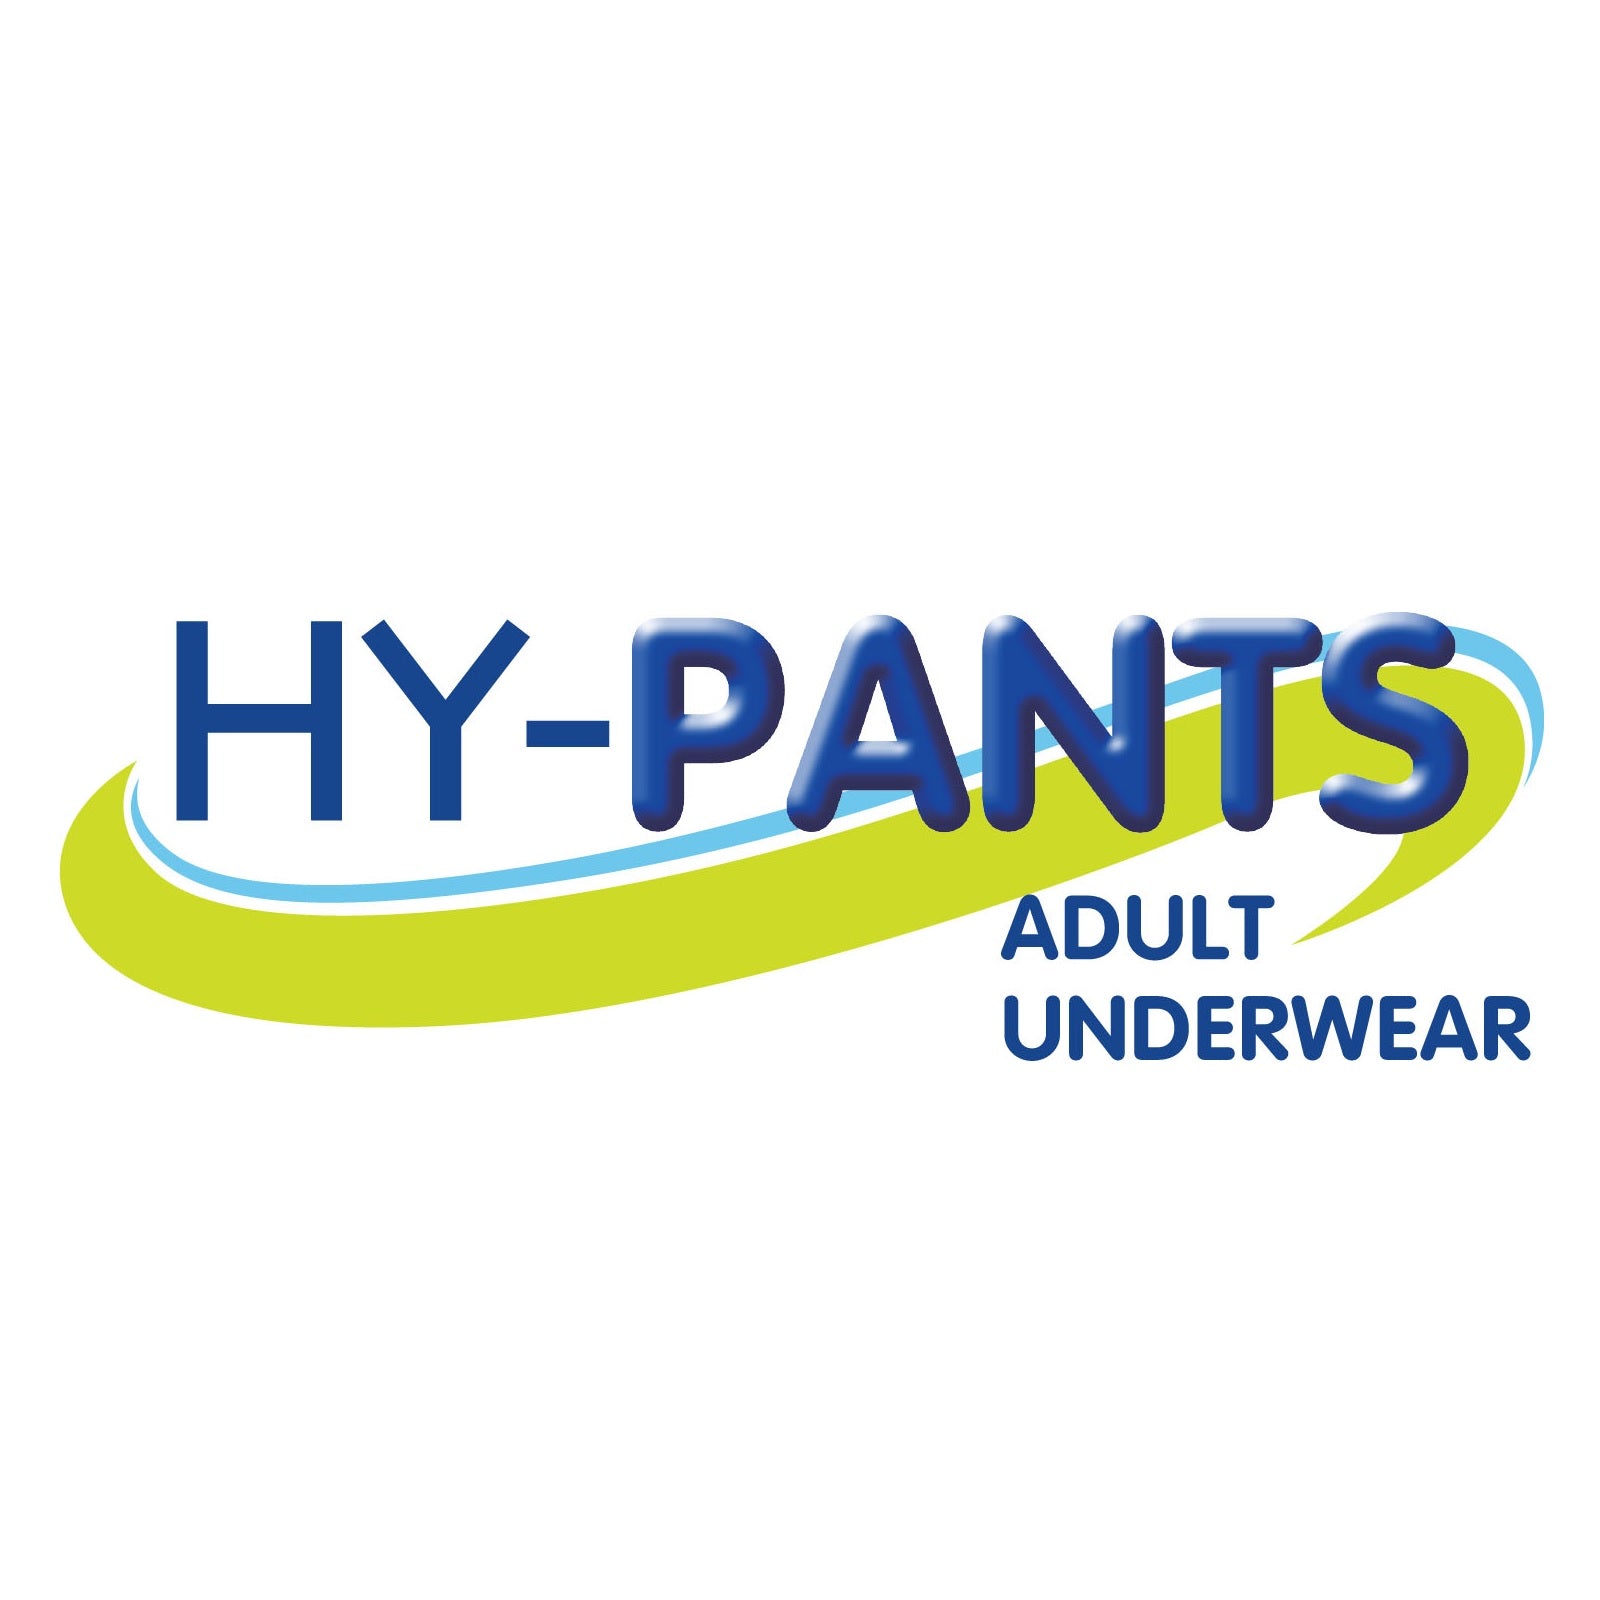 Hy-pants Adult Underwear Extra Large - 1 Pack of 10 Pads